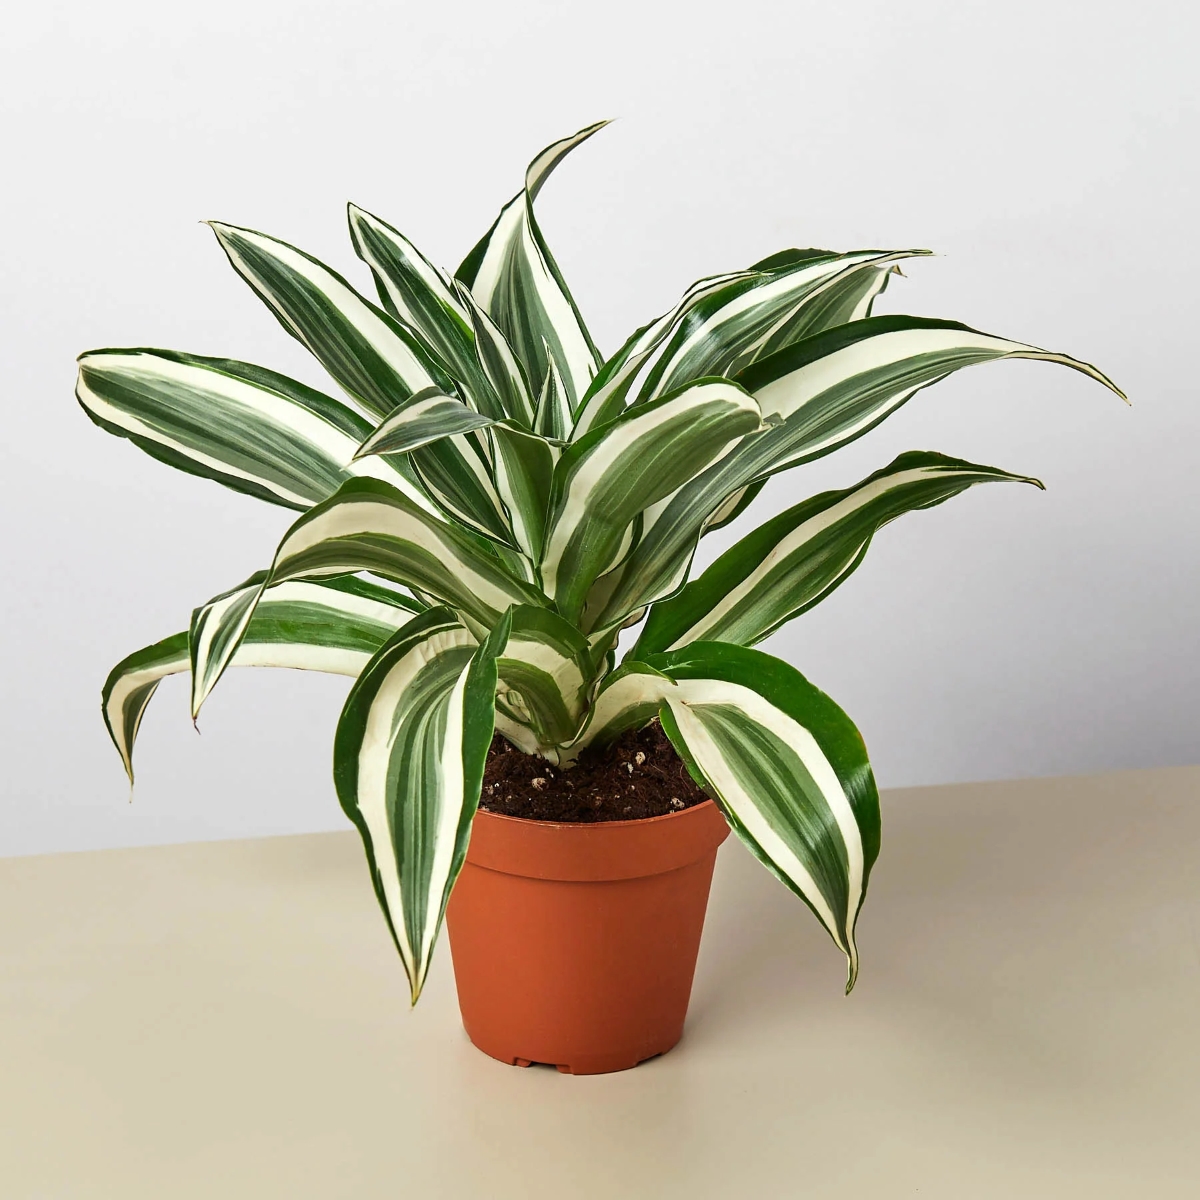 dracaena plant with white striped leaves